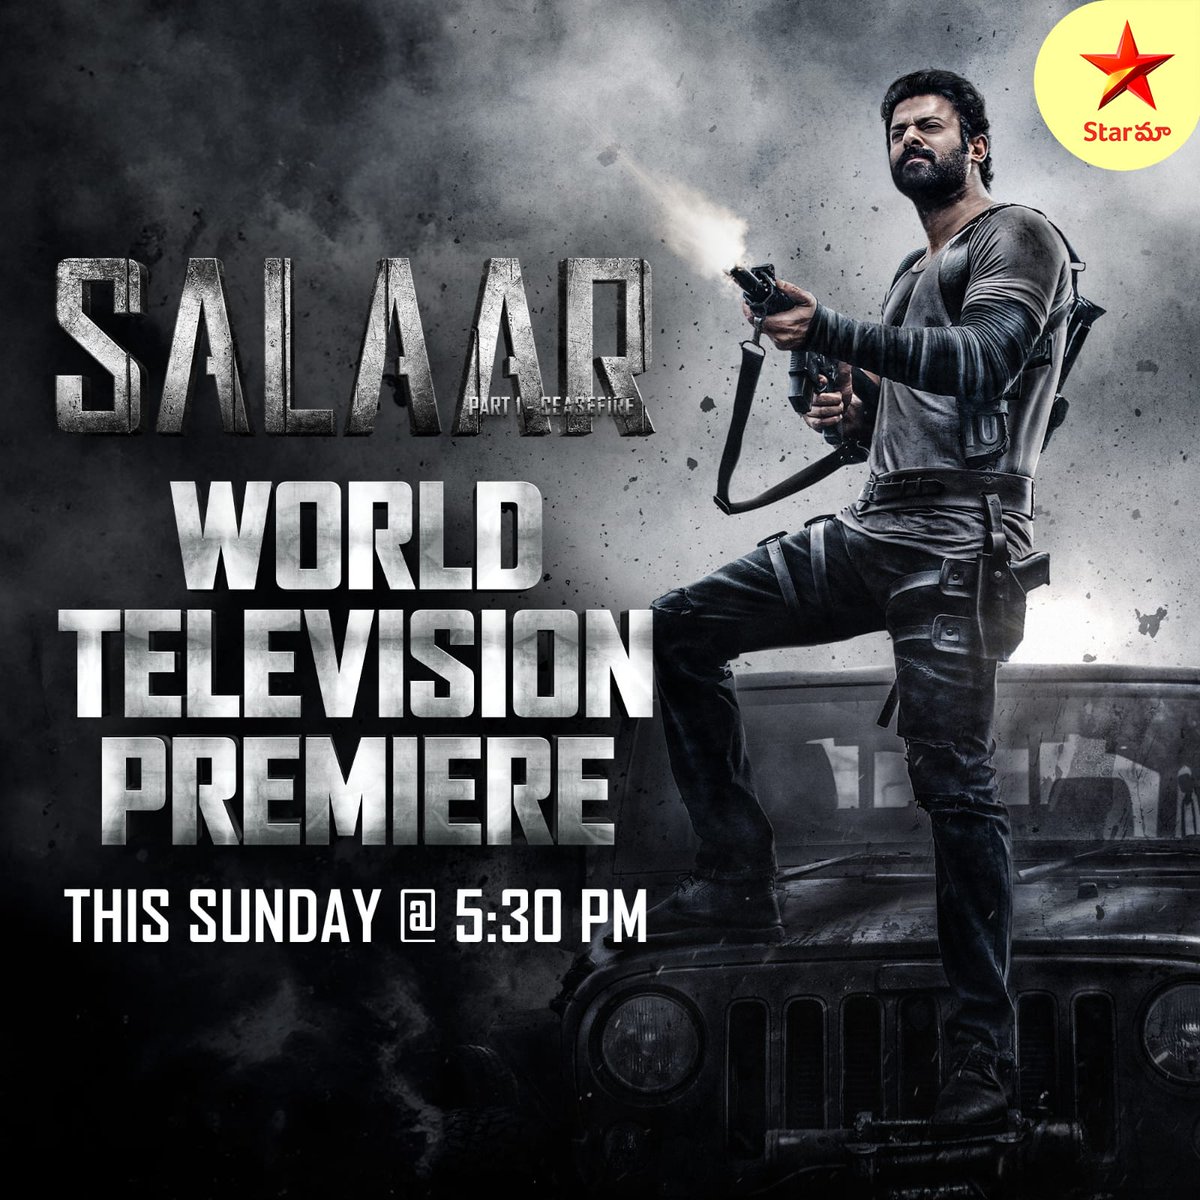 The highly anticipated Super Hit Blockbuster Movie Salaar, featuring the stellar cast of #Prabhas, @PrithviOfficial and @shrutihaasan, is set to premiere this Sunday at 5:30 PM exclusively on #StarMaa #Salaar #TeluguMovies #Prabhas